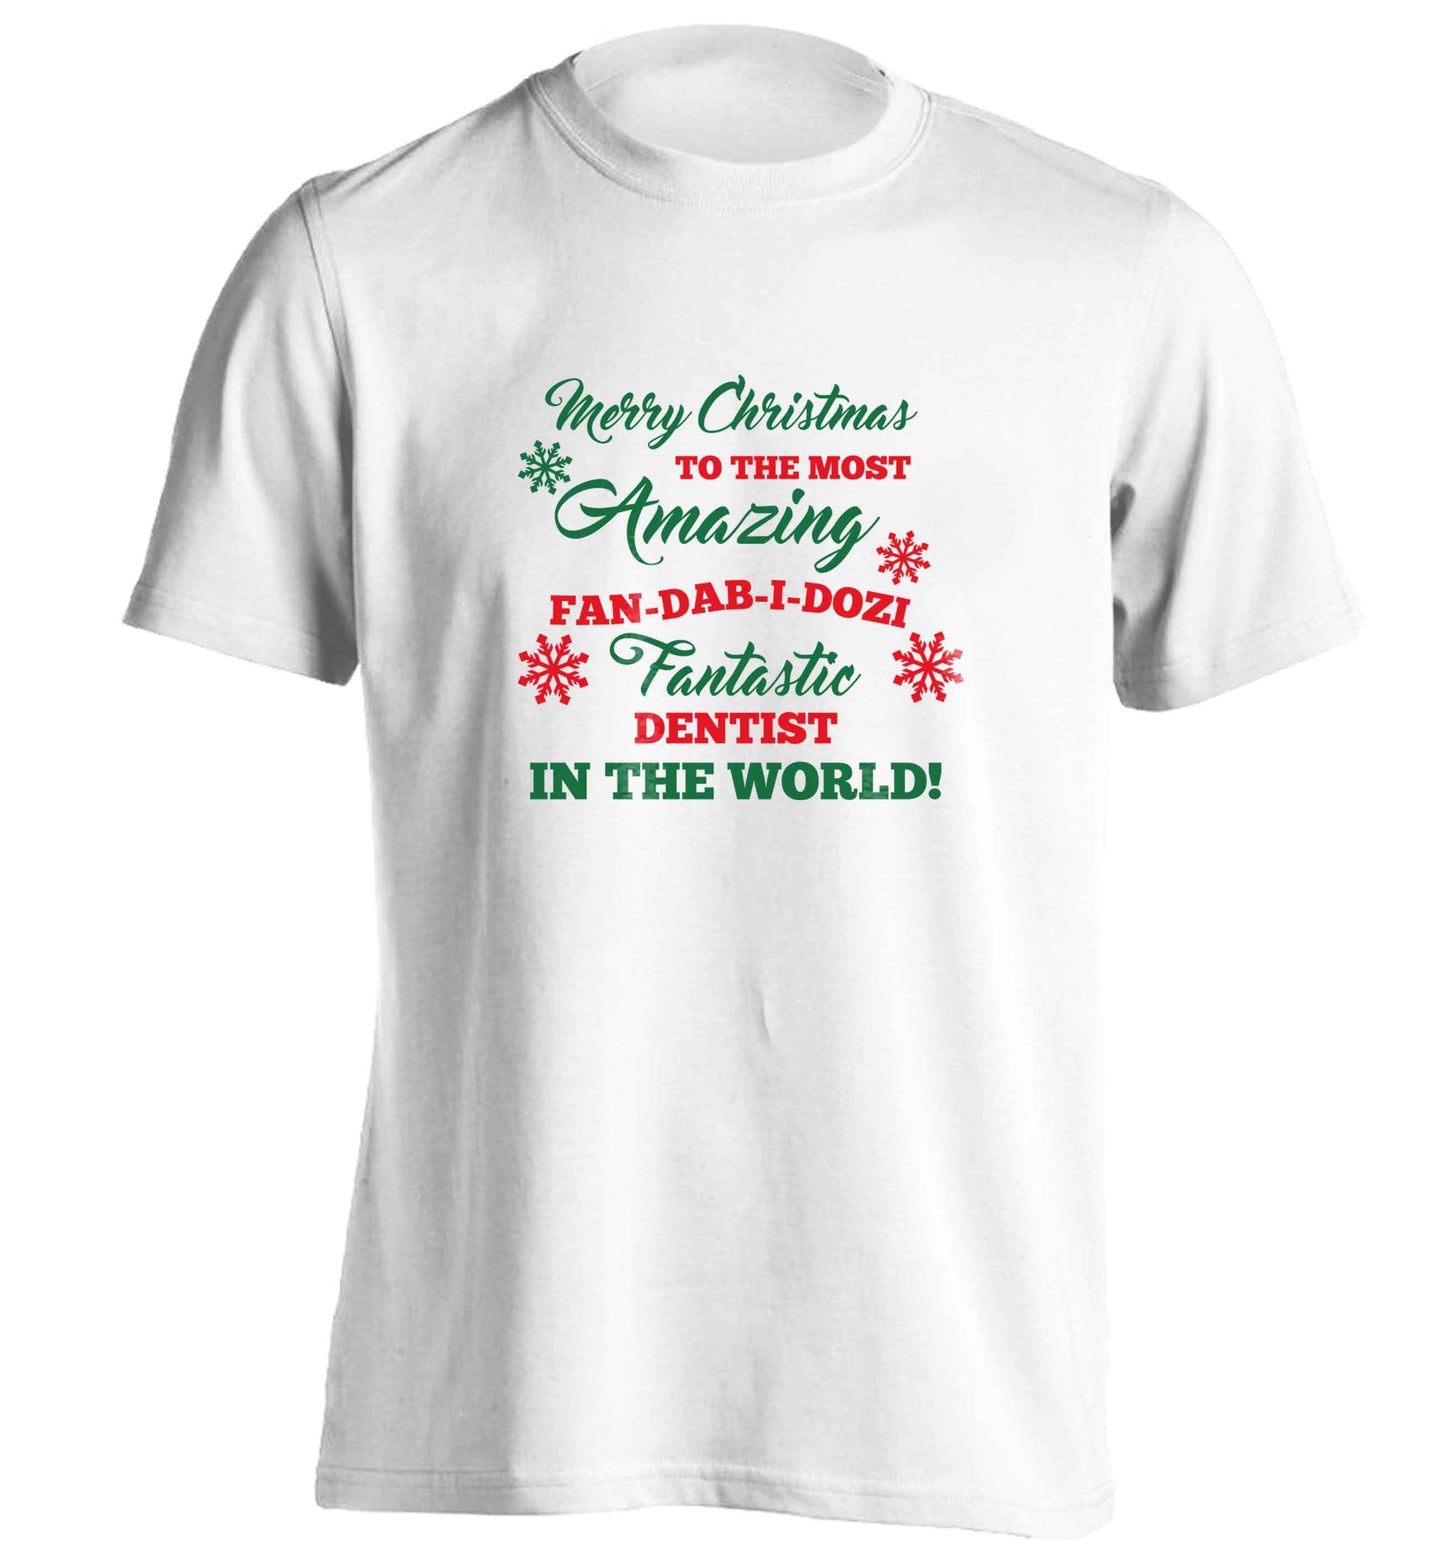 Merry Christmas to the most amazing dentist in the world! adults unisex white Tshirt 2XL